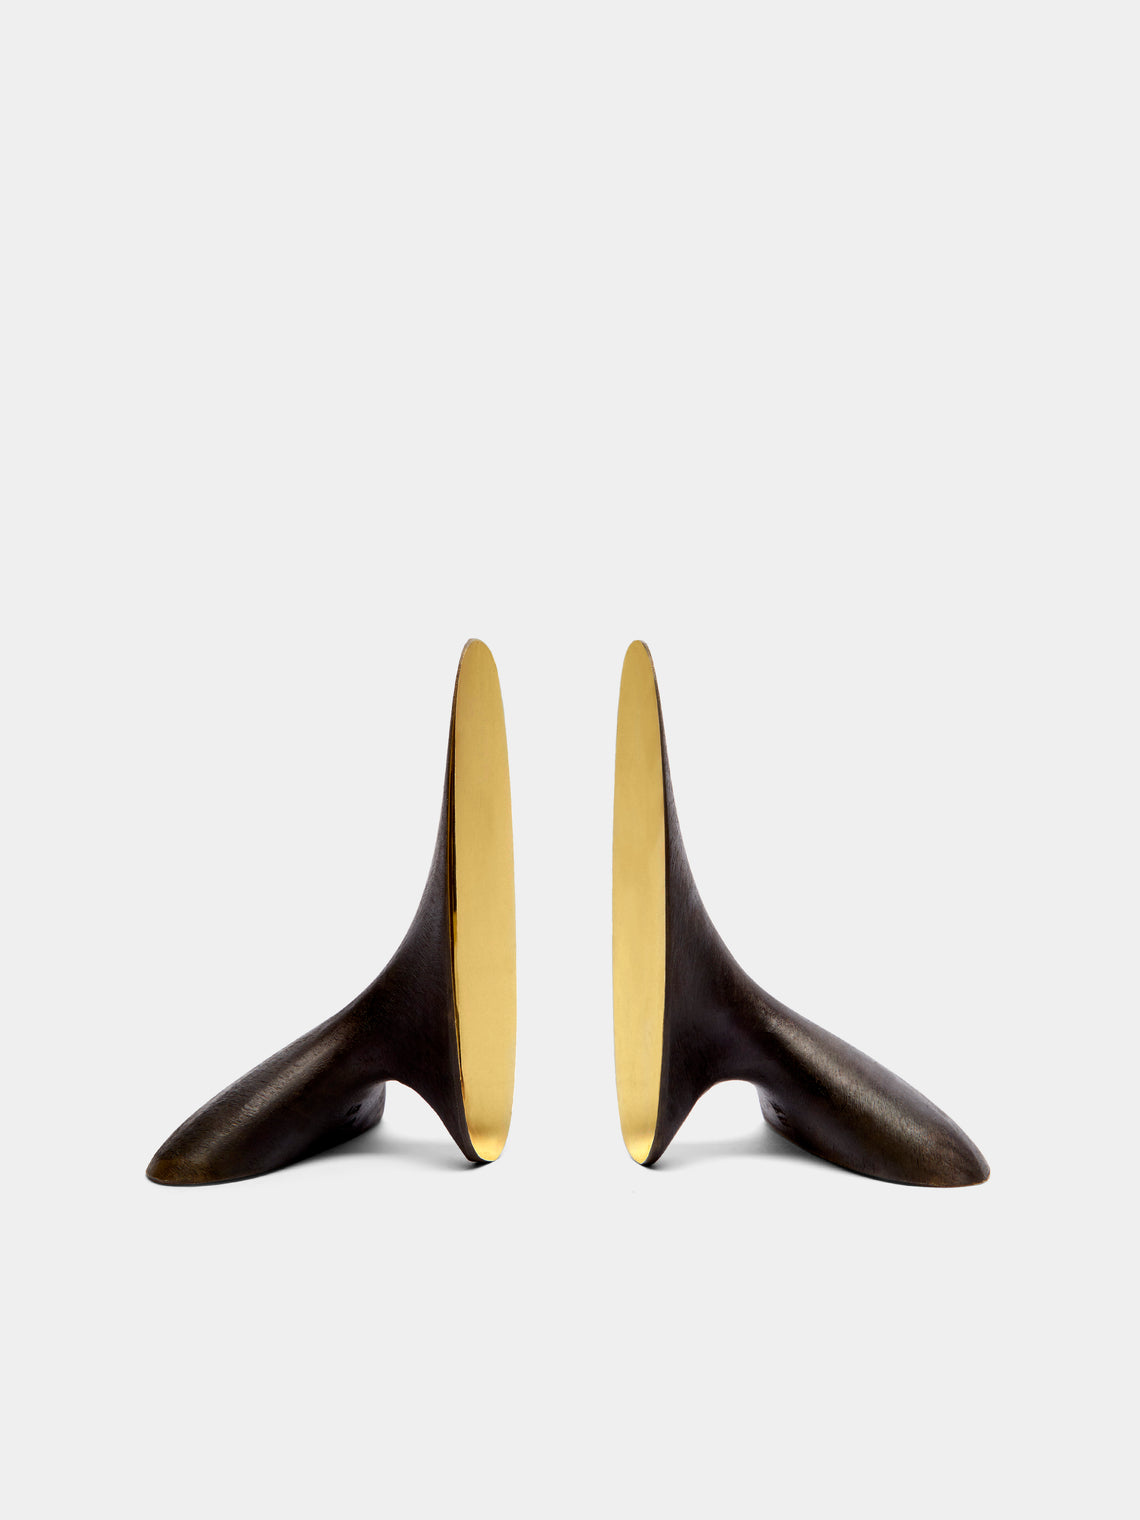 Carl Auböck - Brass Painted Bookends - Black - ABASK - 